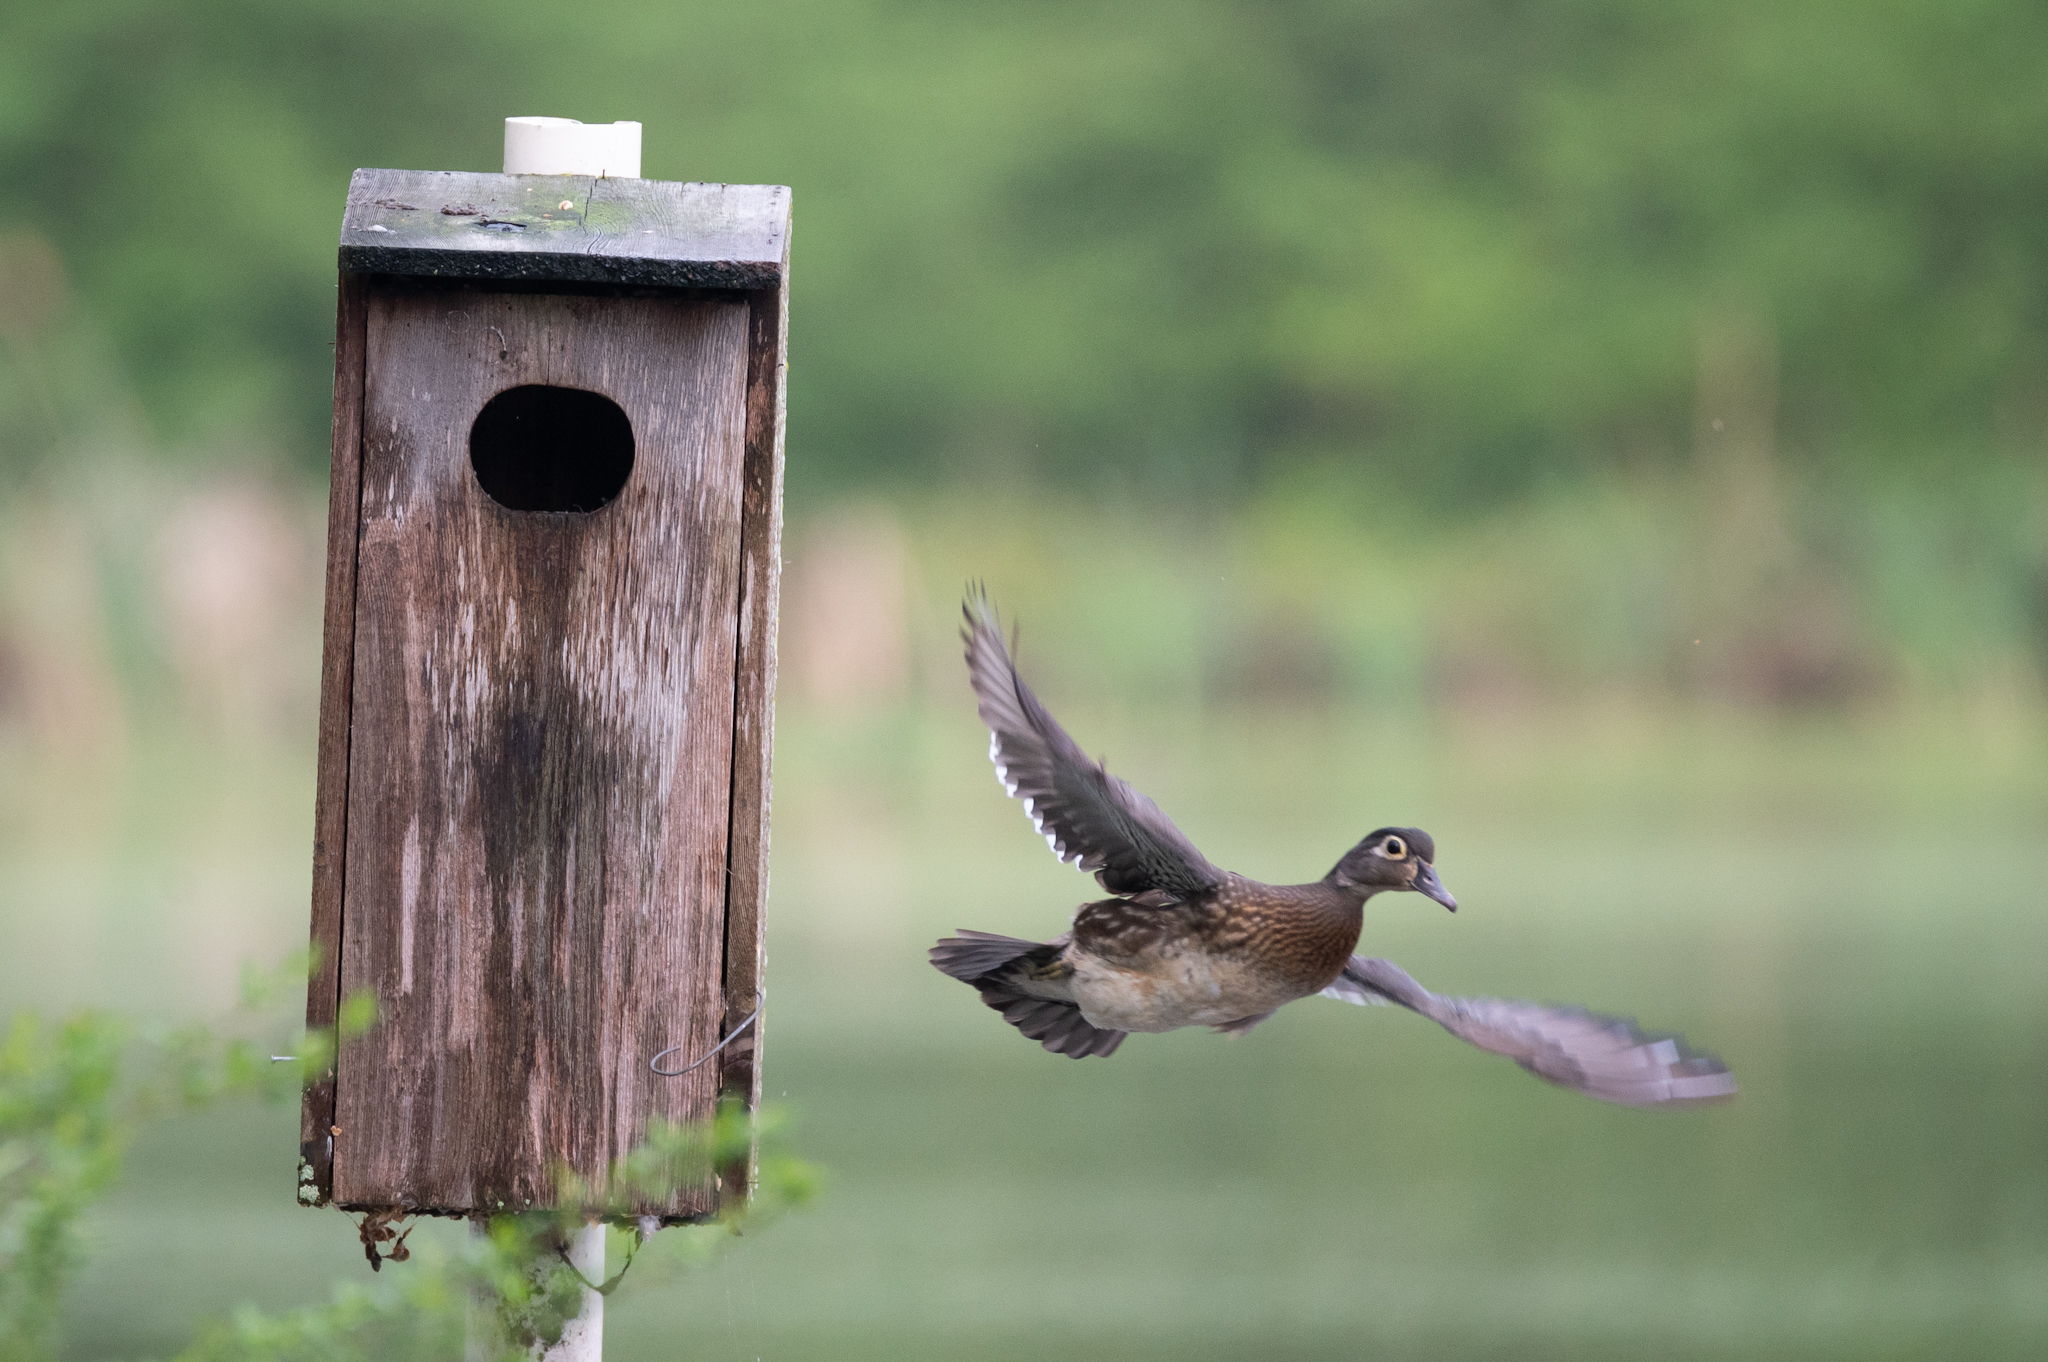 hen-wood-duck-leaving-her-nest-for-morning-feed-by-jeremy-peele